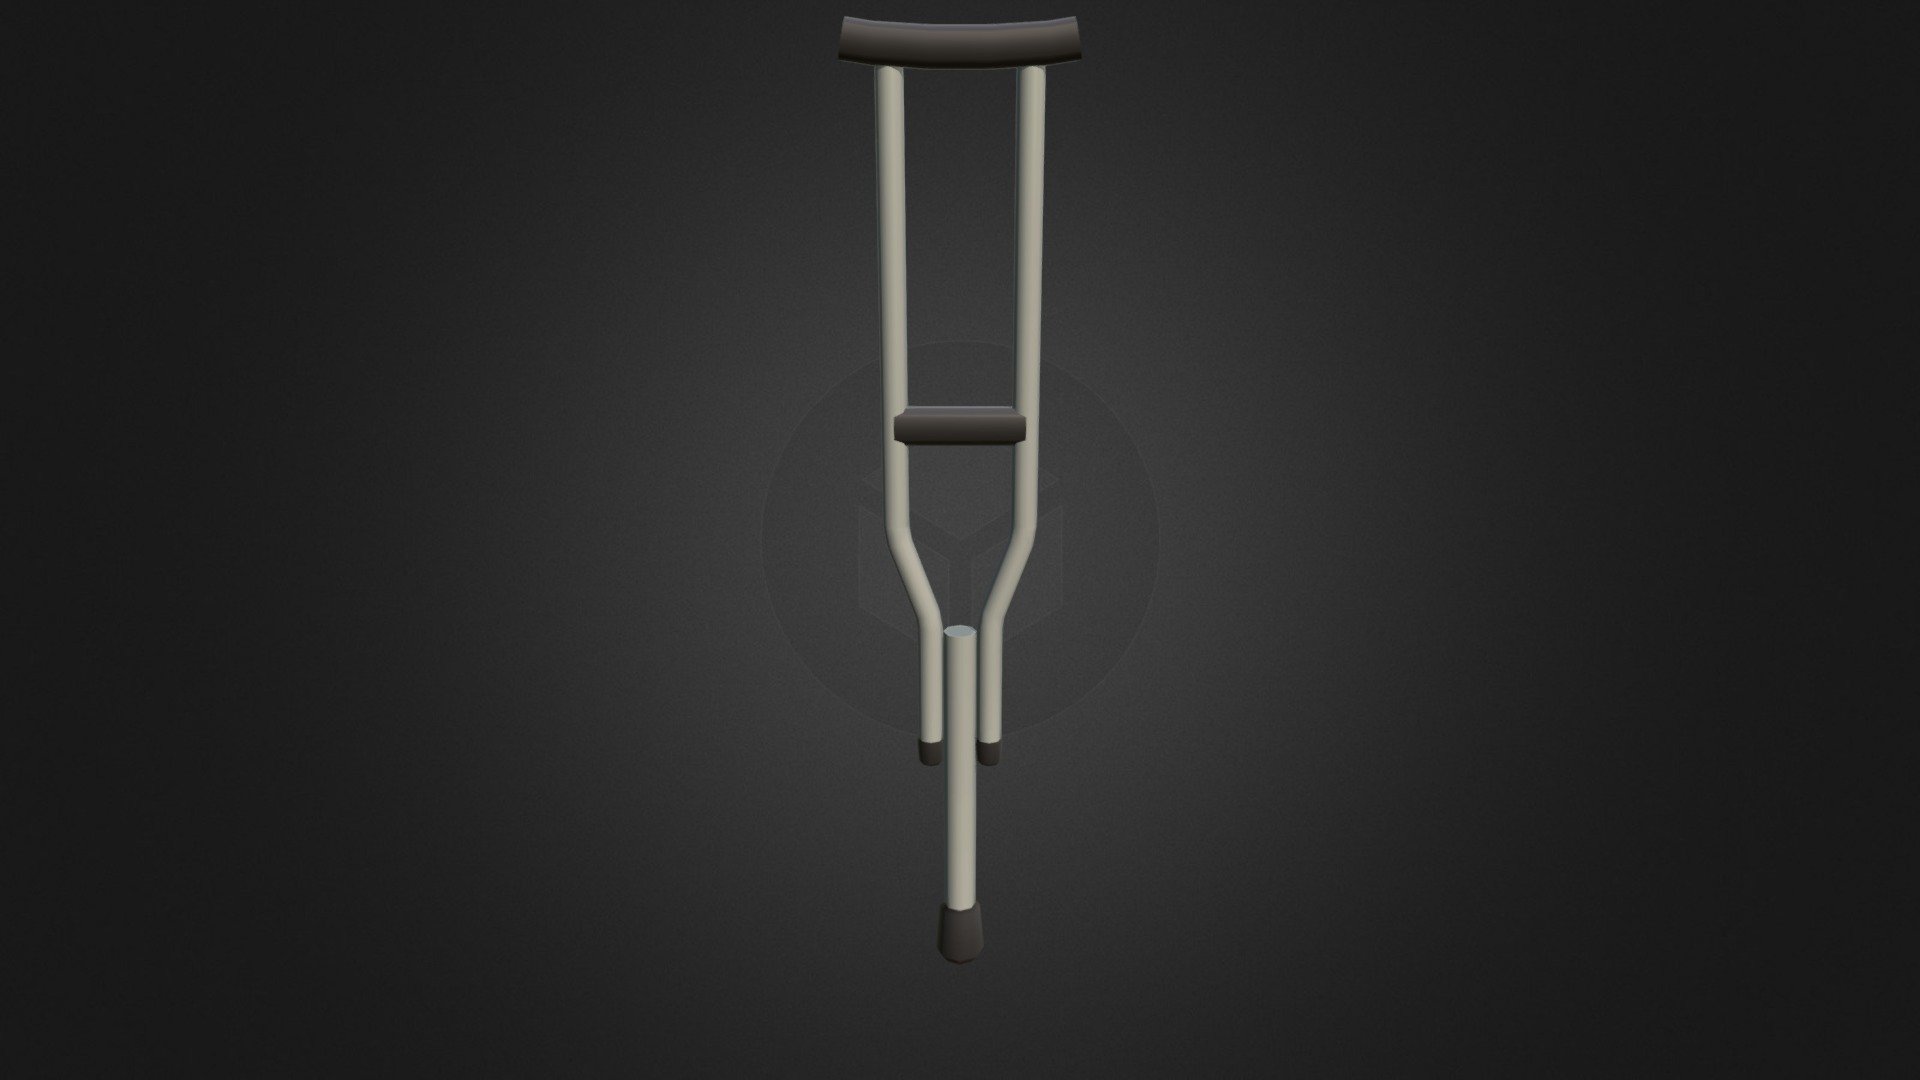 A single crutch

Number of textures: 1
Texture dimensions: 2048 PNG
Vert count: 250
Polygon count: 456
Number of meshes/prefabs: 1
UV mapping: Yes - Crutch - 3D model by Ncubate Studios (@VinceFung) 3d model